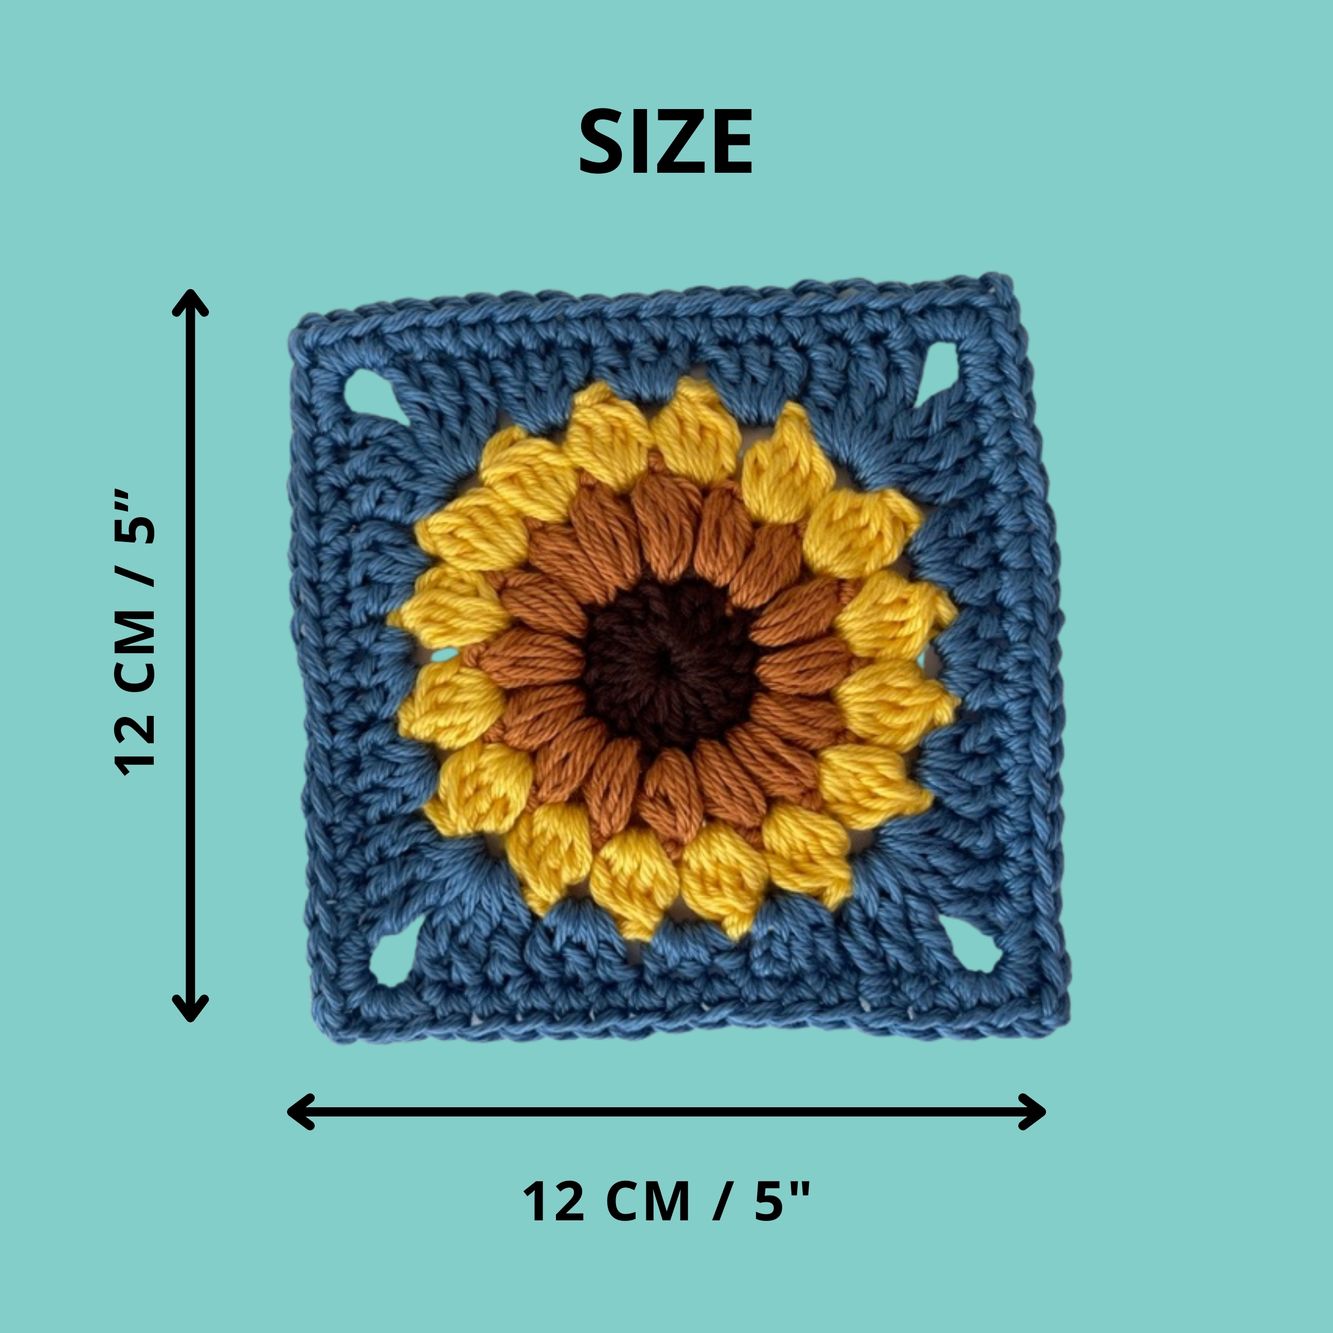 size of Sunflower granny square